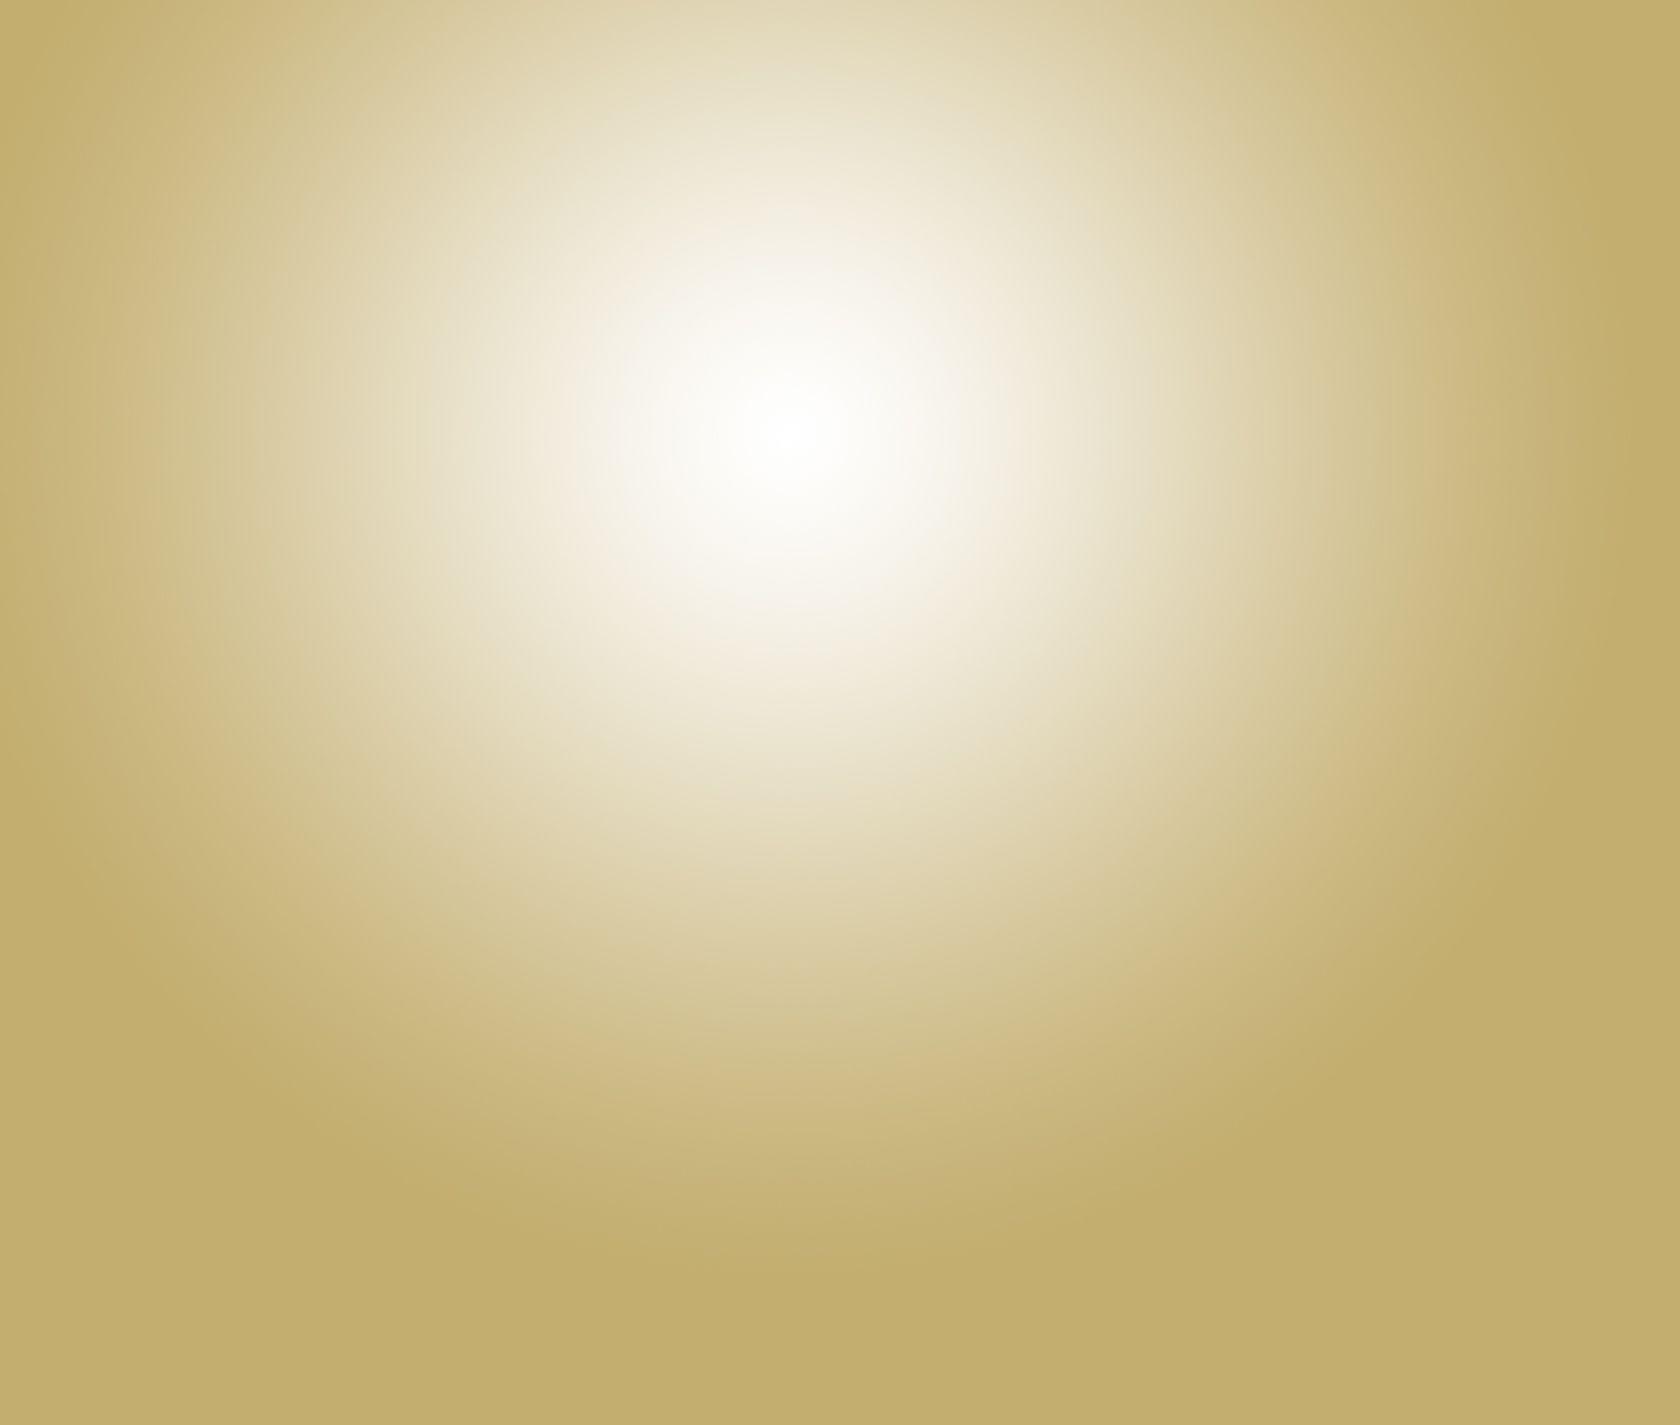 Light gold gradient abstract background Stock Photo by kritchanut 86895792